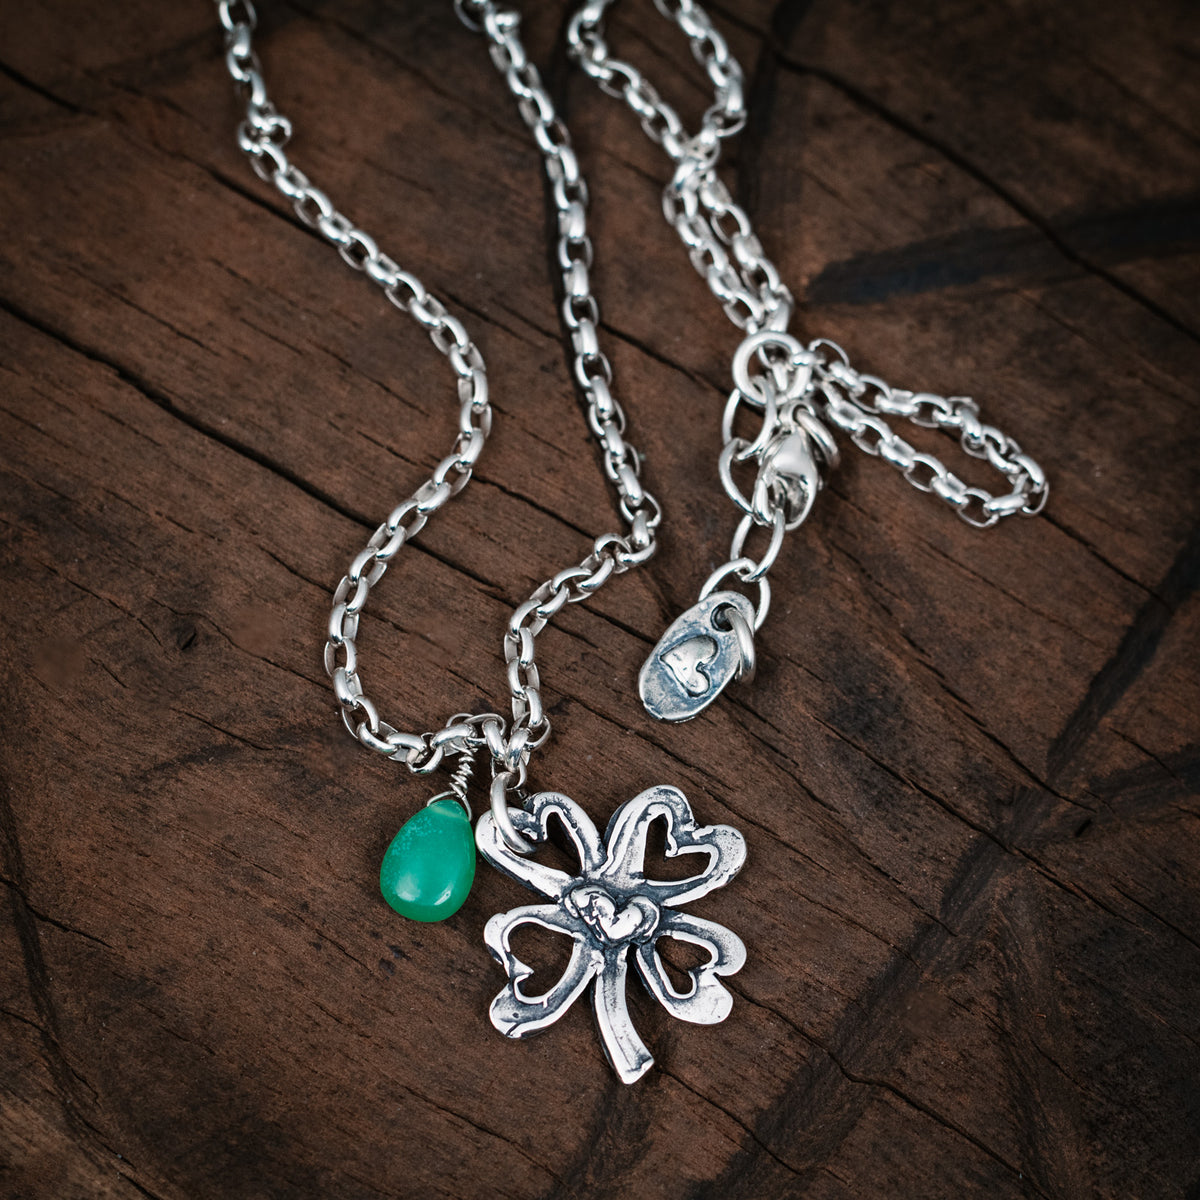 Luck of the Irish Necklace- Limited Edition